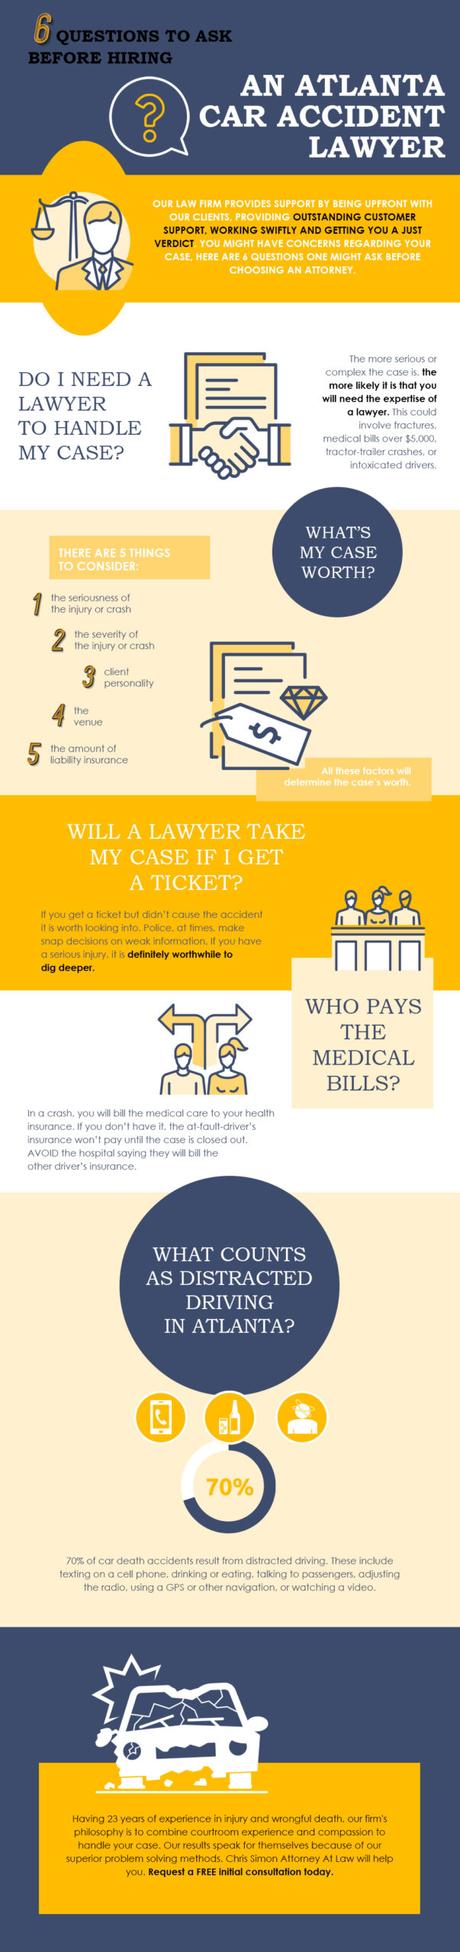 6 Questions to Ask Before Hiring an Atlanta Car Accident Lawyer